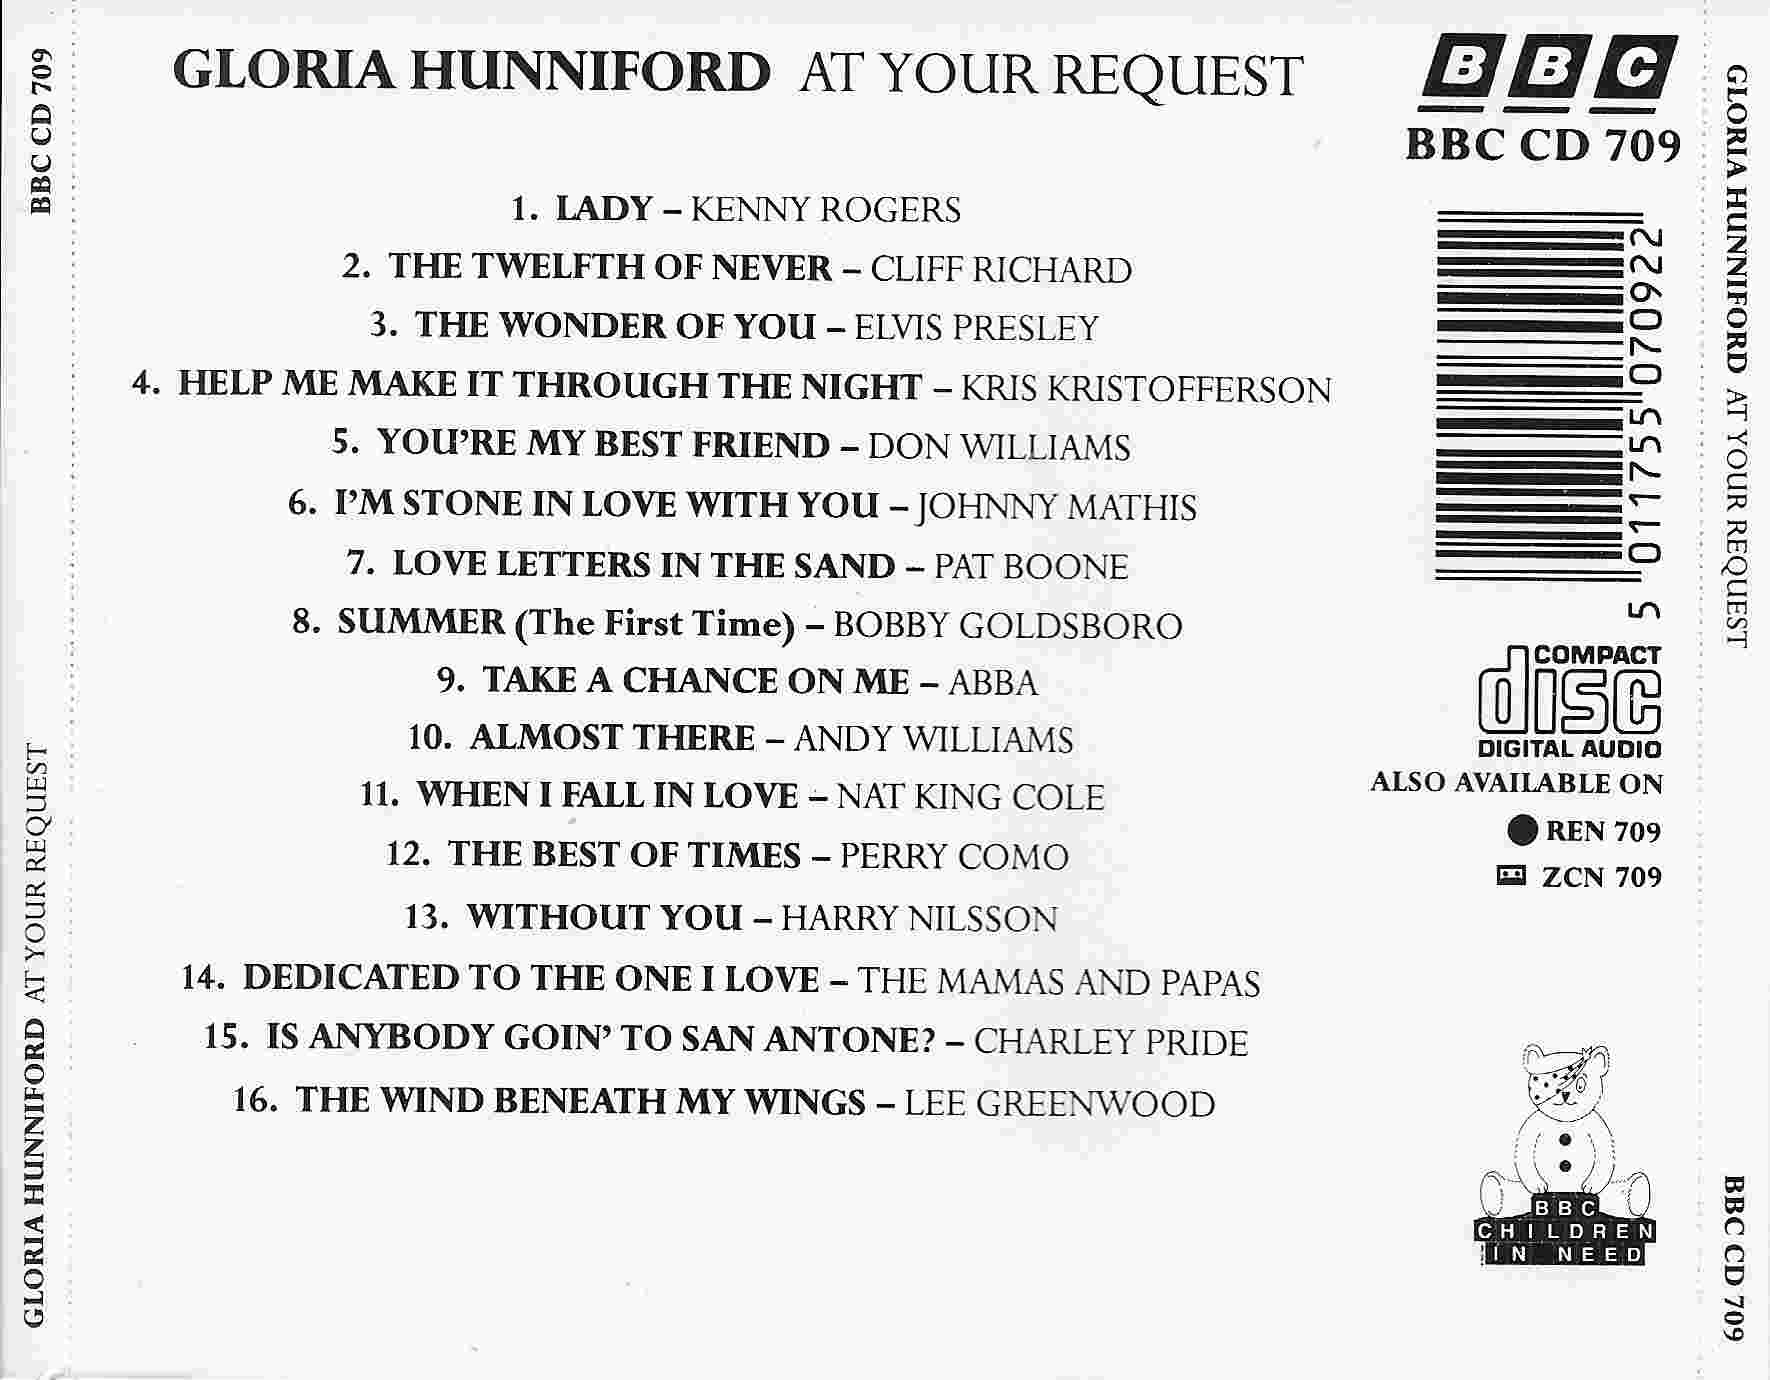 Picture of BBCCD709 At your request - Gloria Hunniford by artist Gloria Hunniford from the BBC records and Tapes library